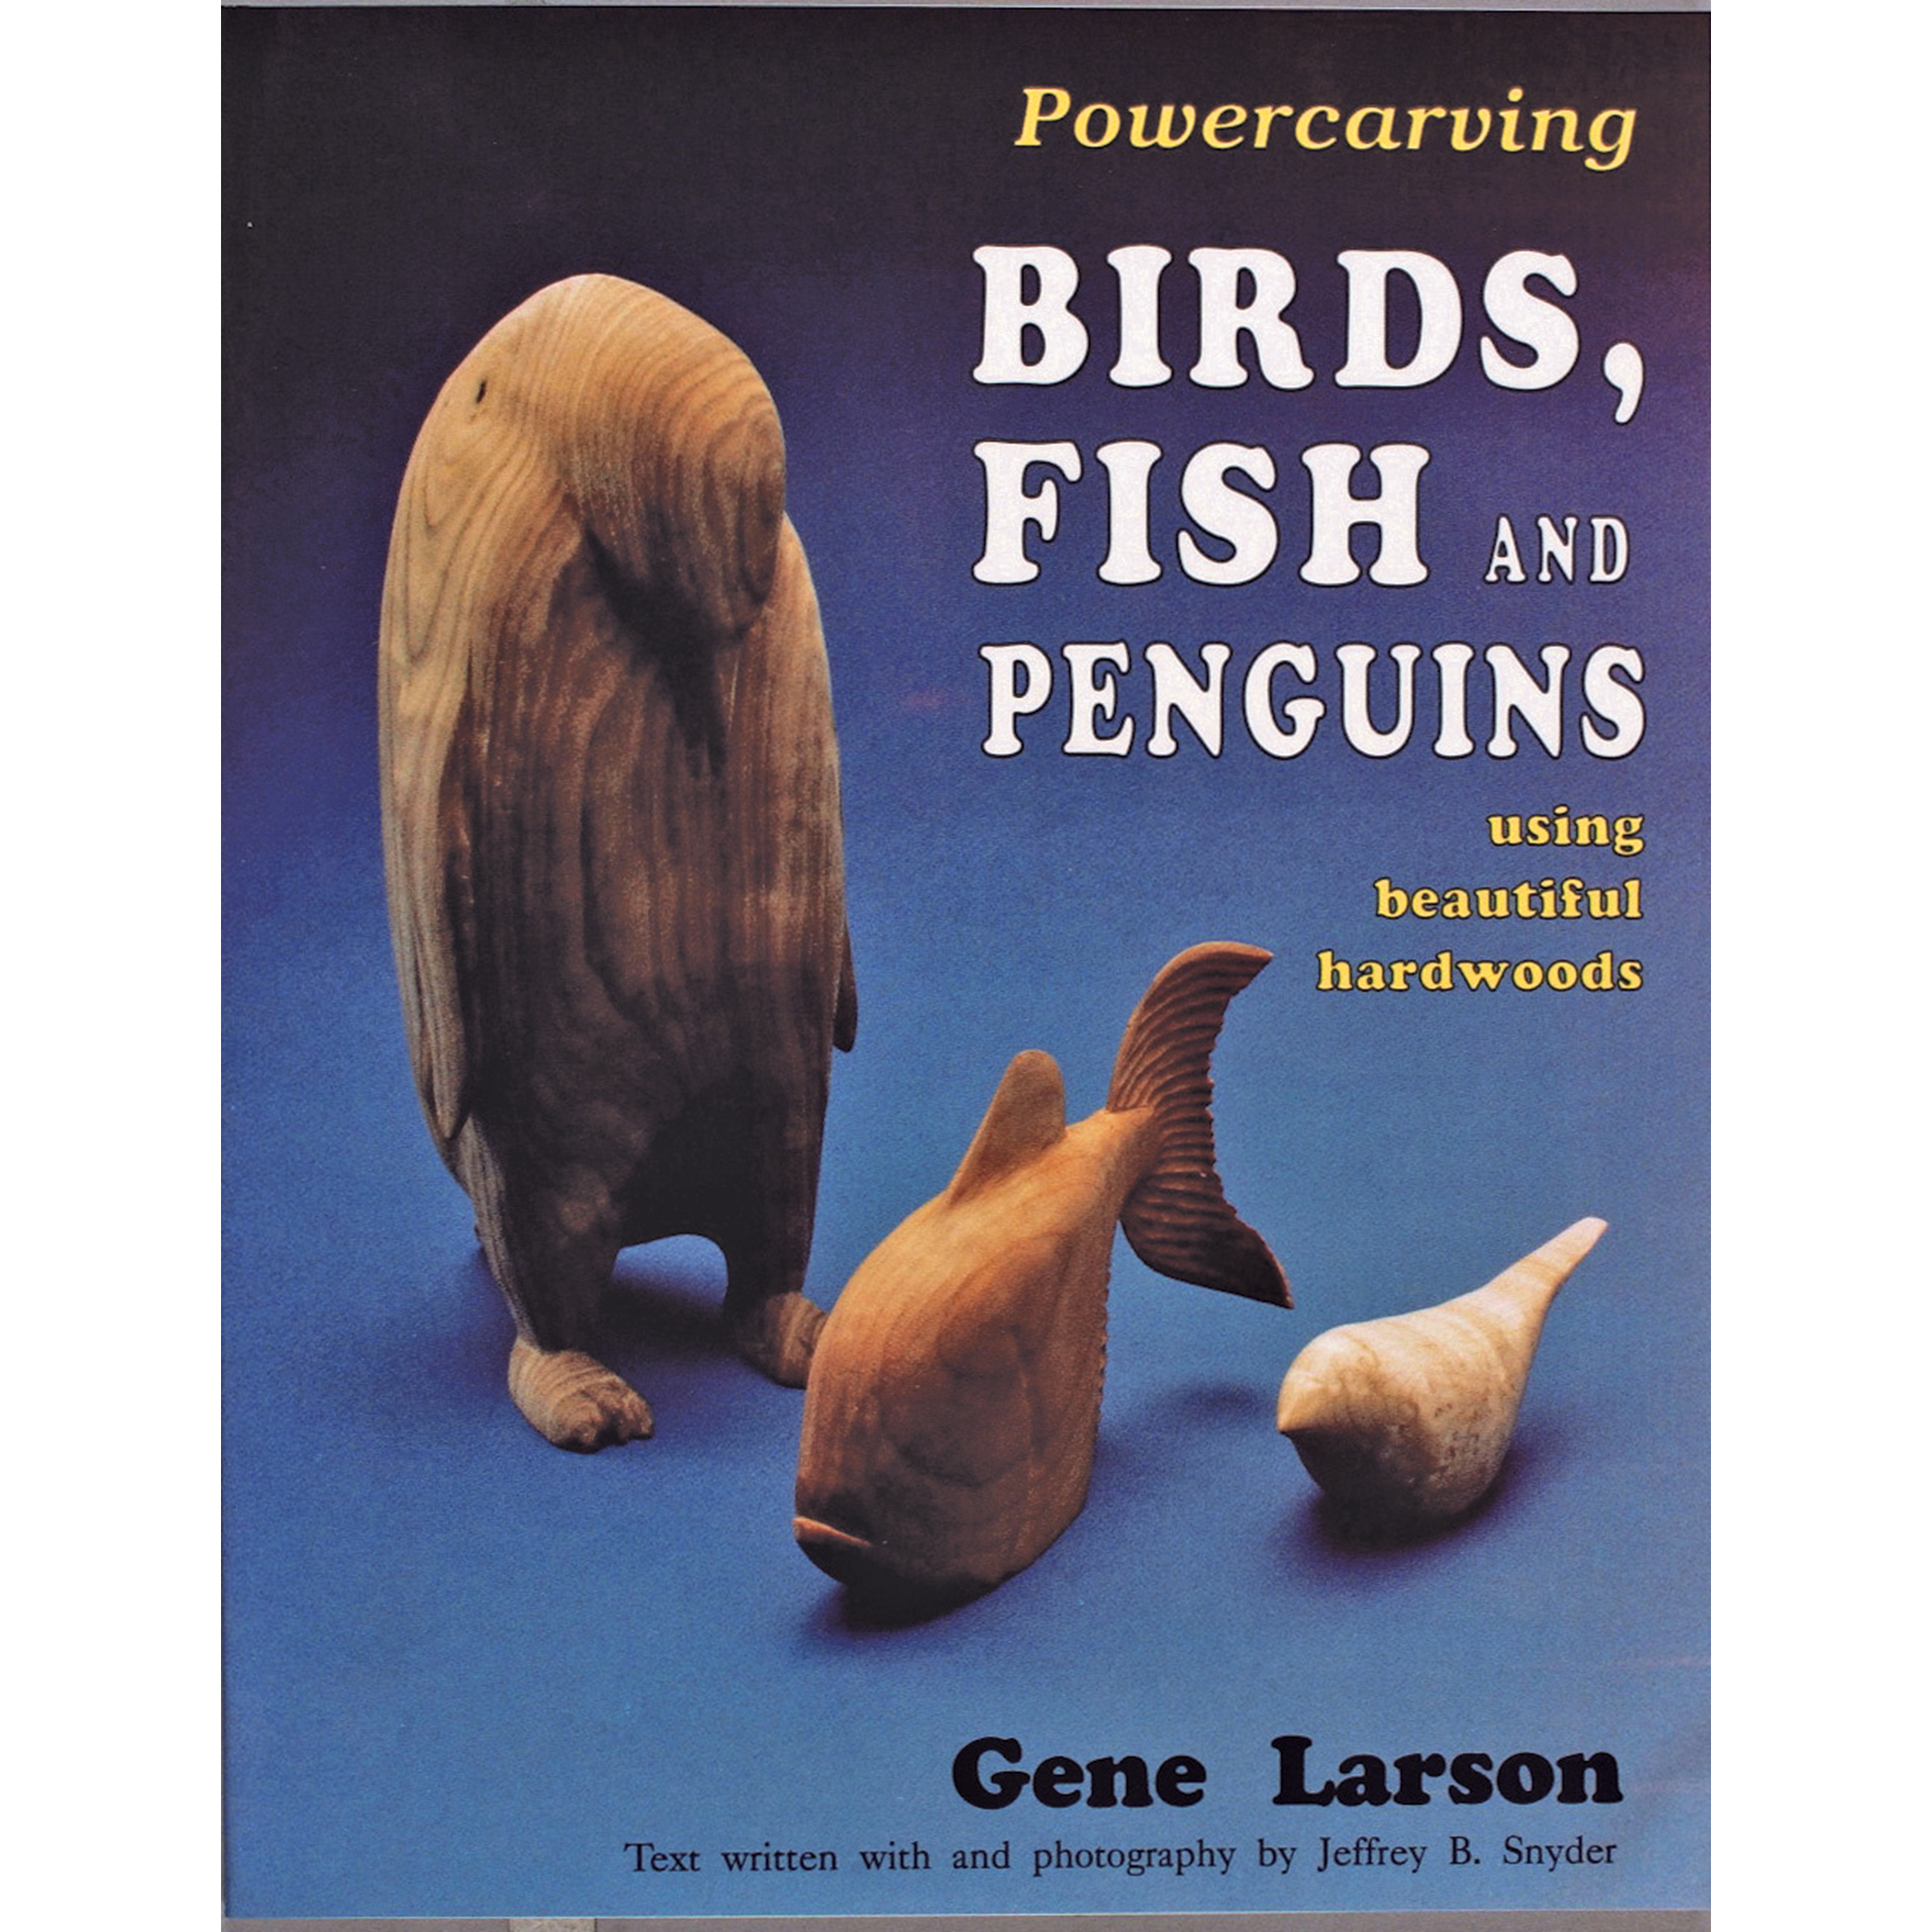 Powercarving Birds, Fish, And Penguins